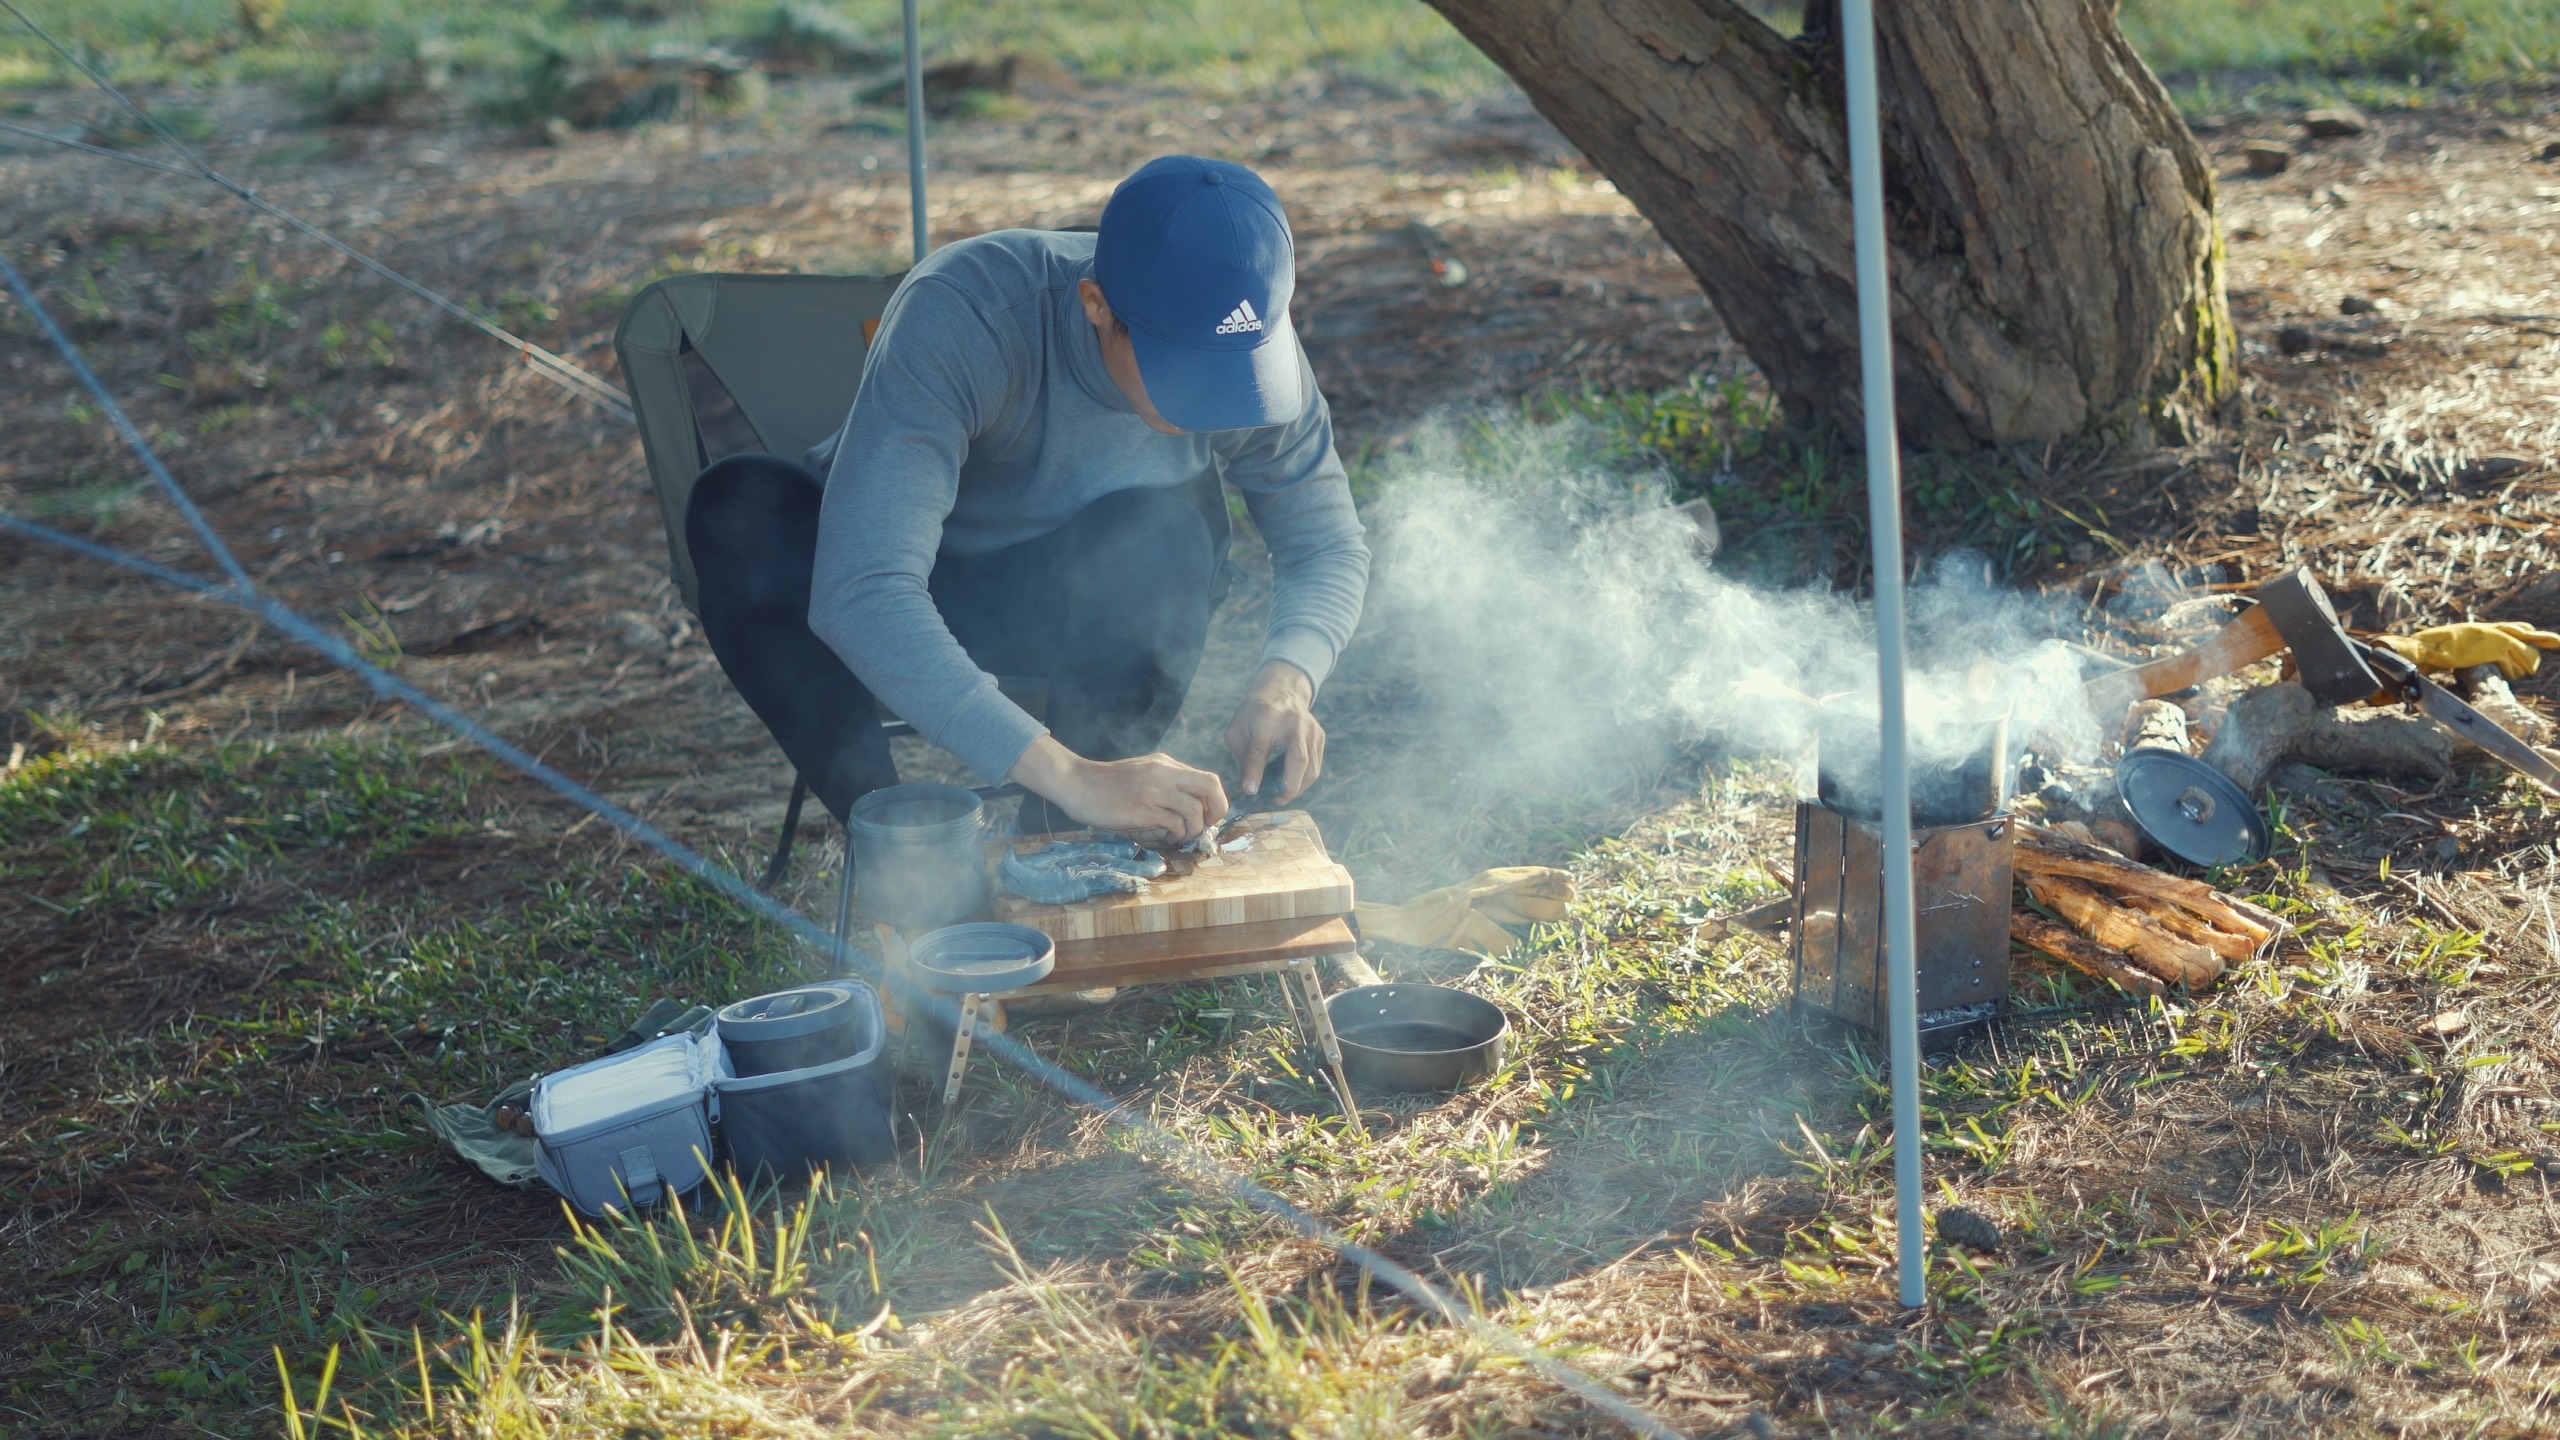 A supplied photo shows Lu Hoang Thong cooking his food in the forest during a solo camping trip.